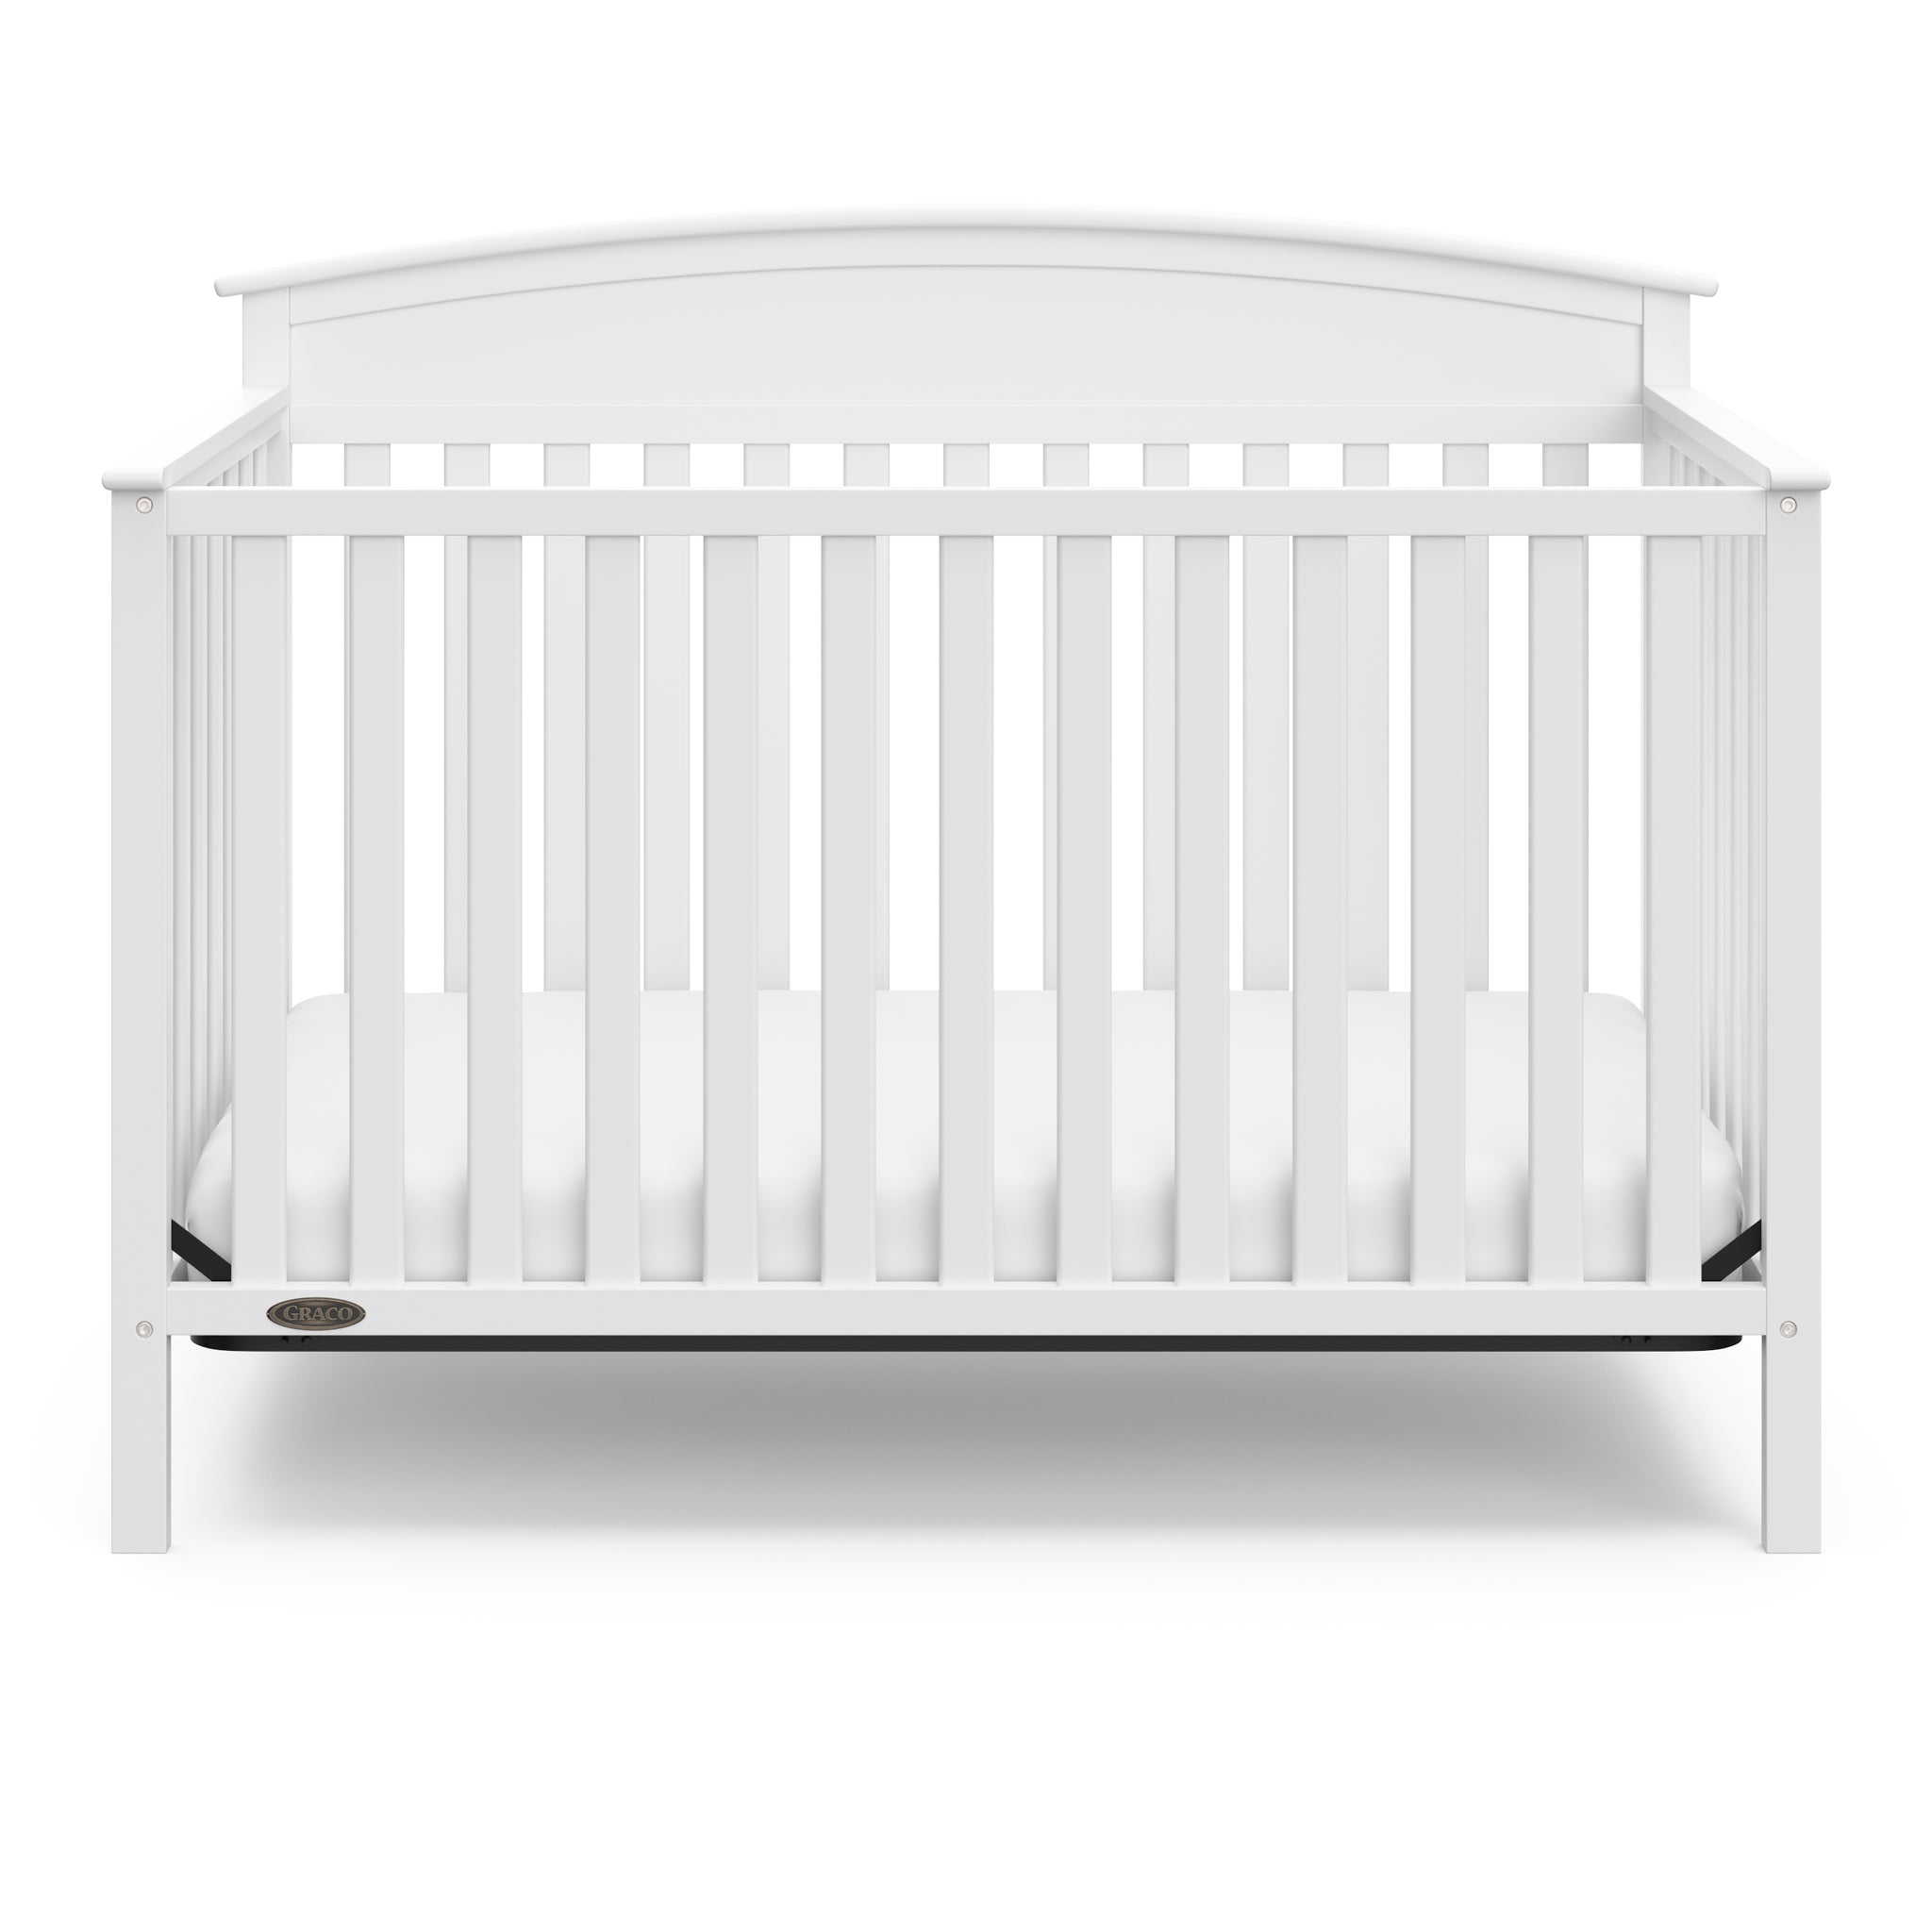 Front view of white crib